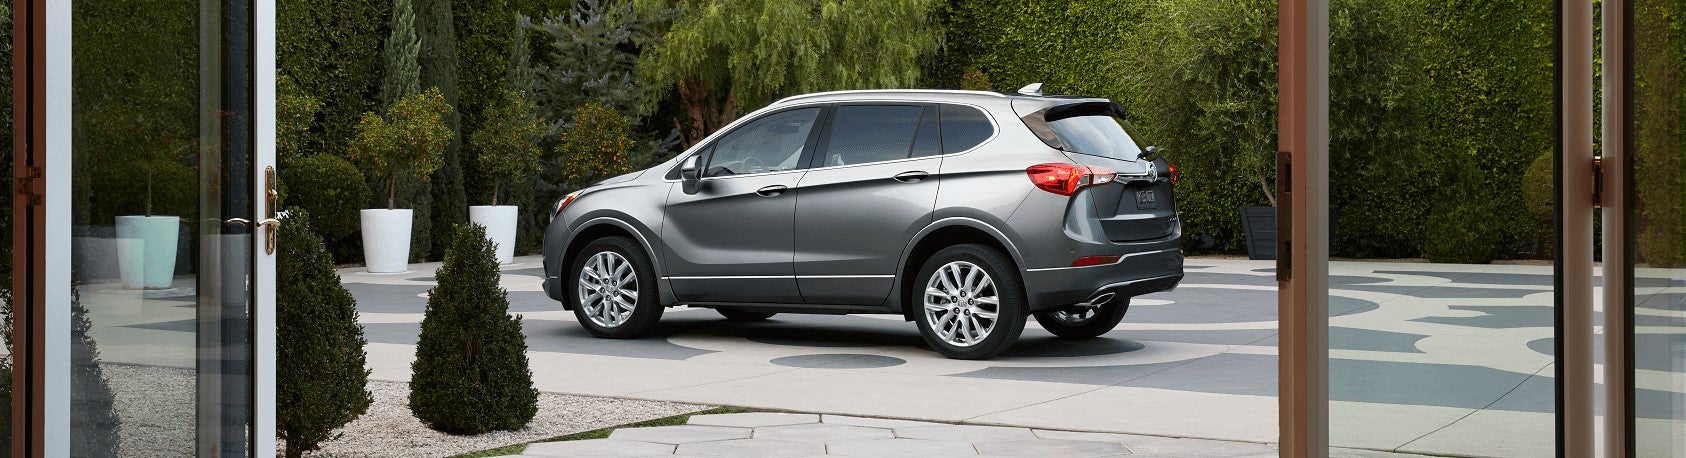 Buick Envision for Sale near Noblesville IN